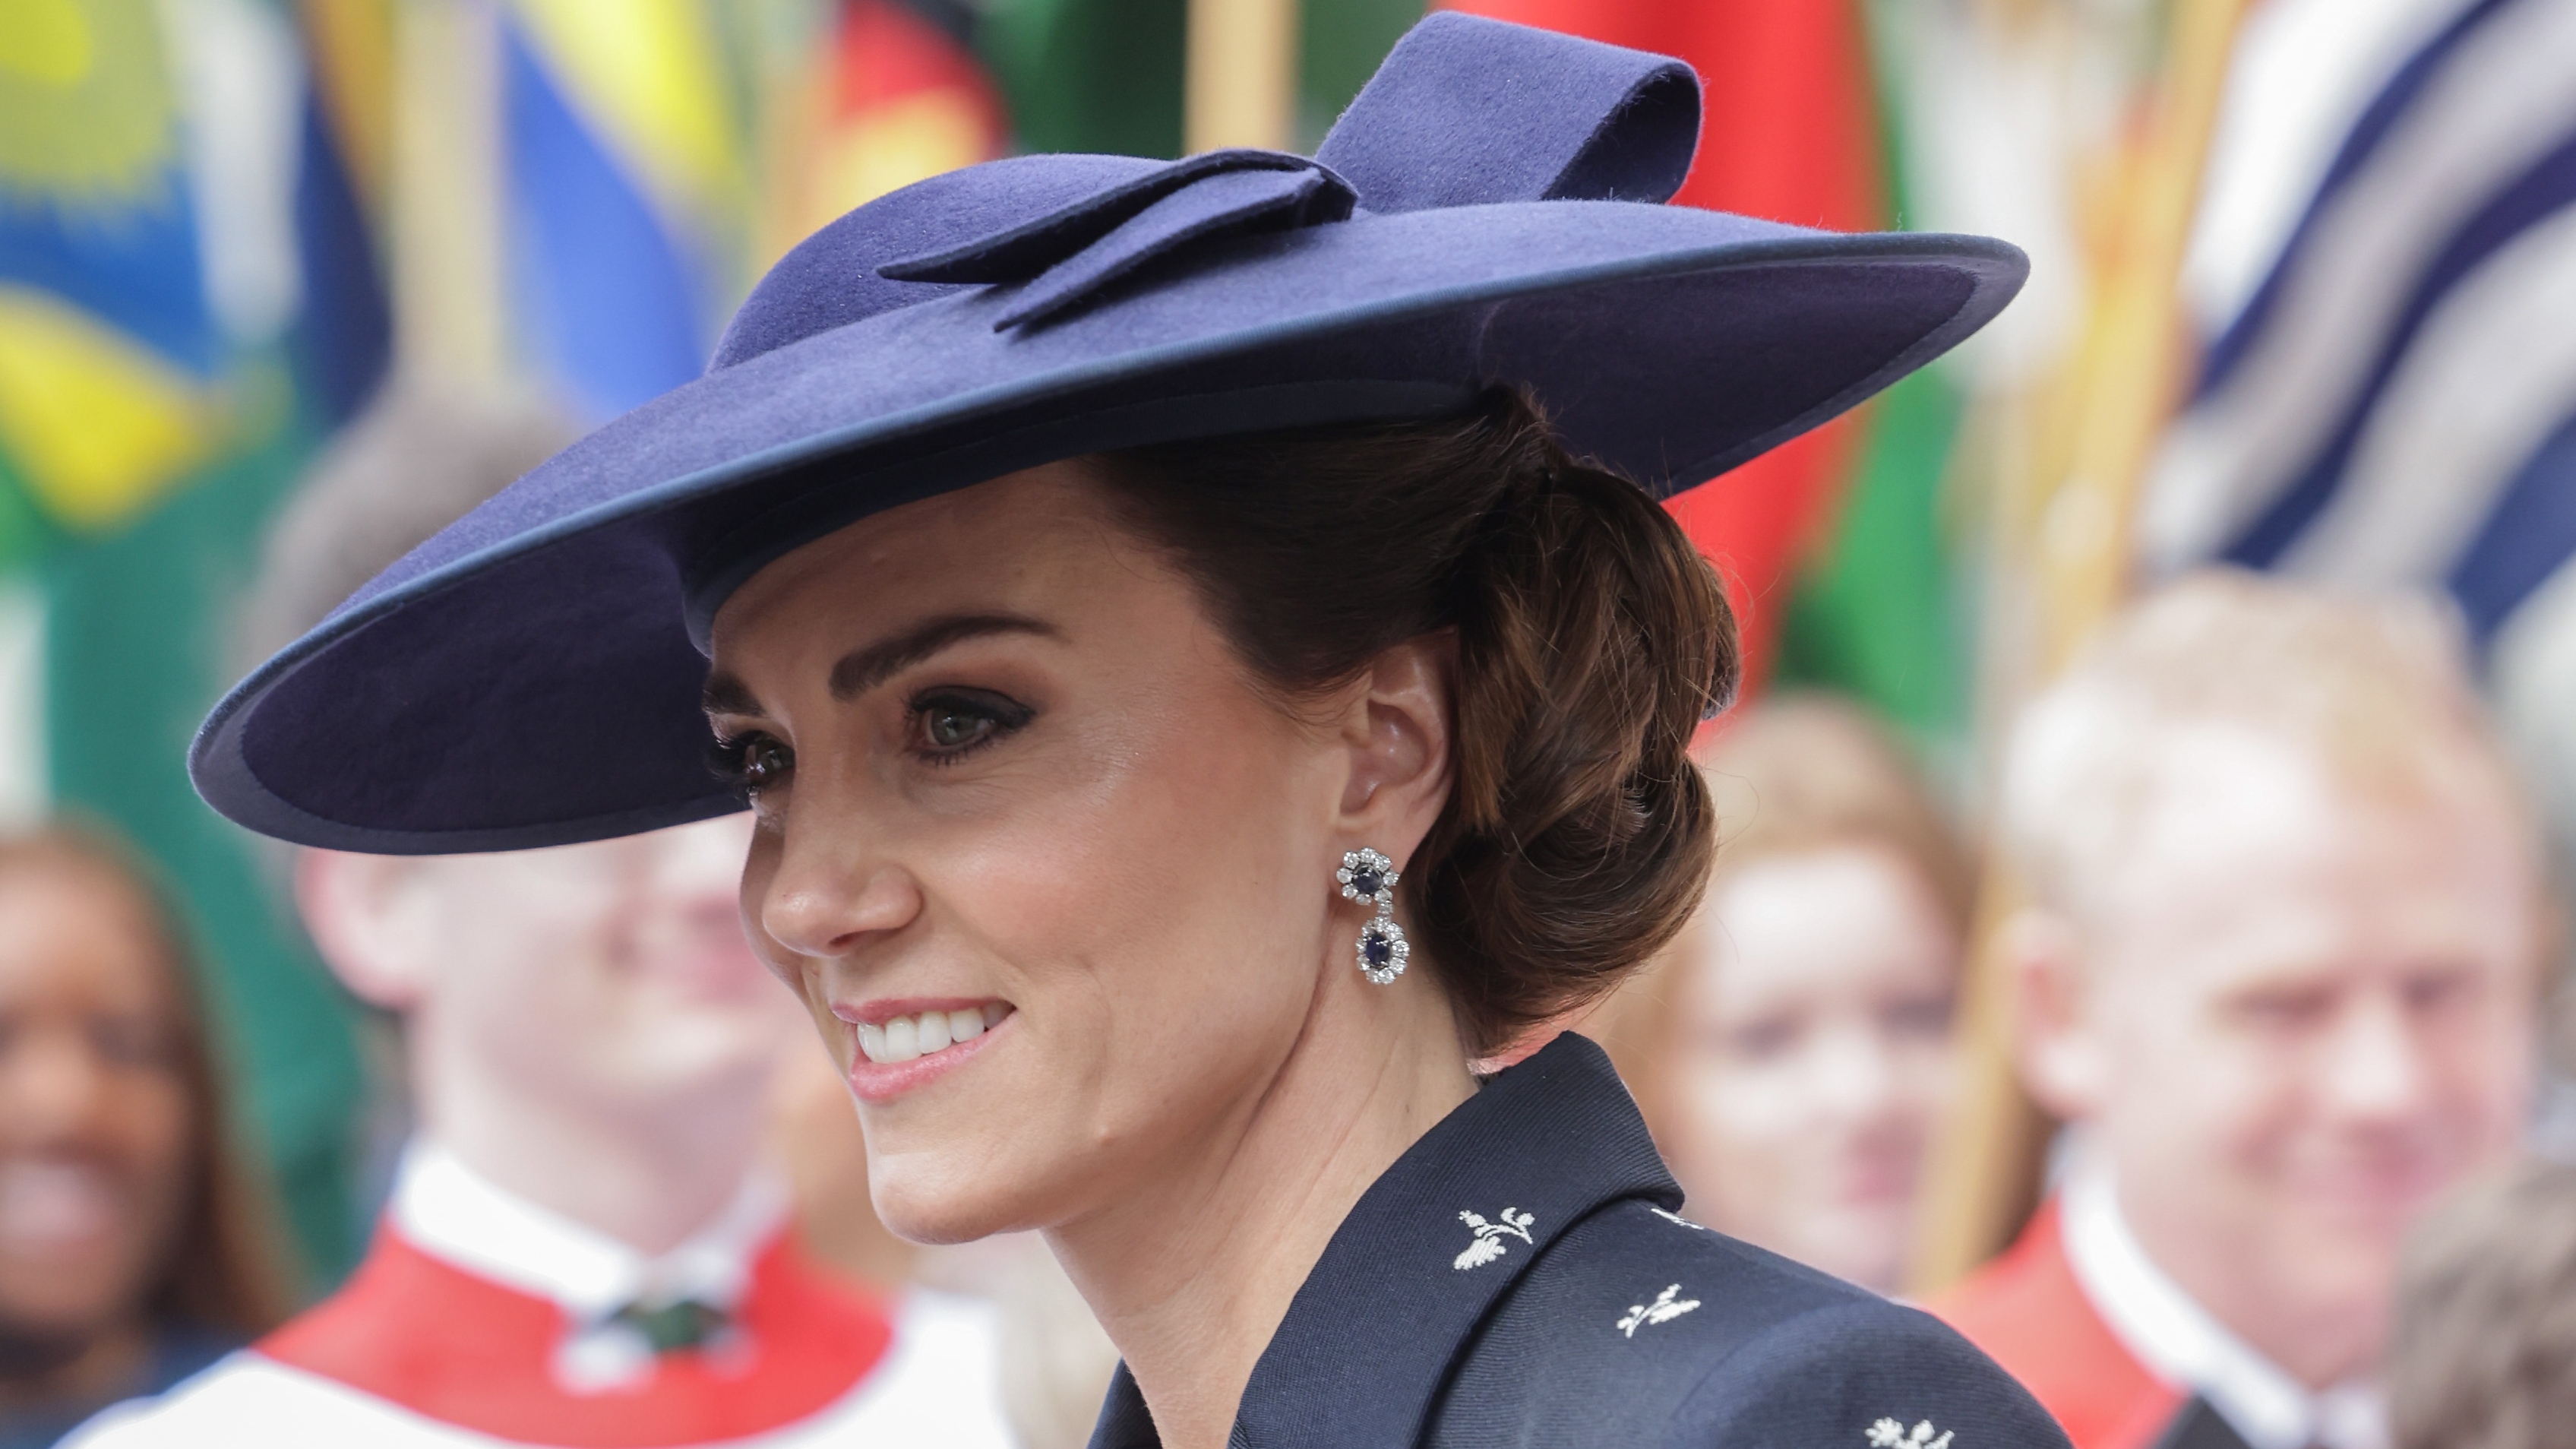 Kate Middleton Brings Back a Controversial Trend: The Peplum